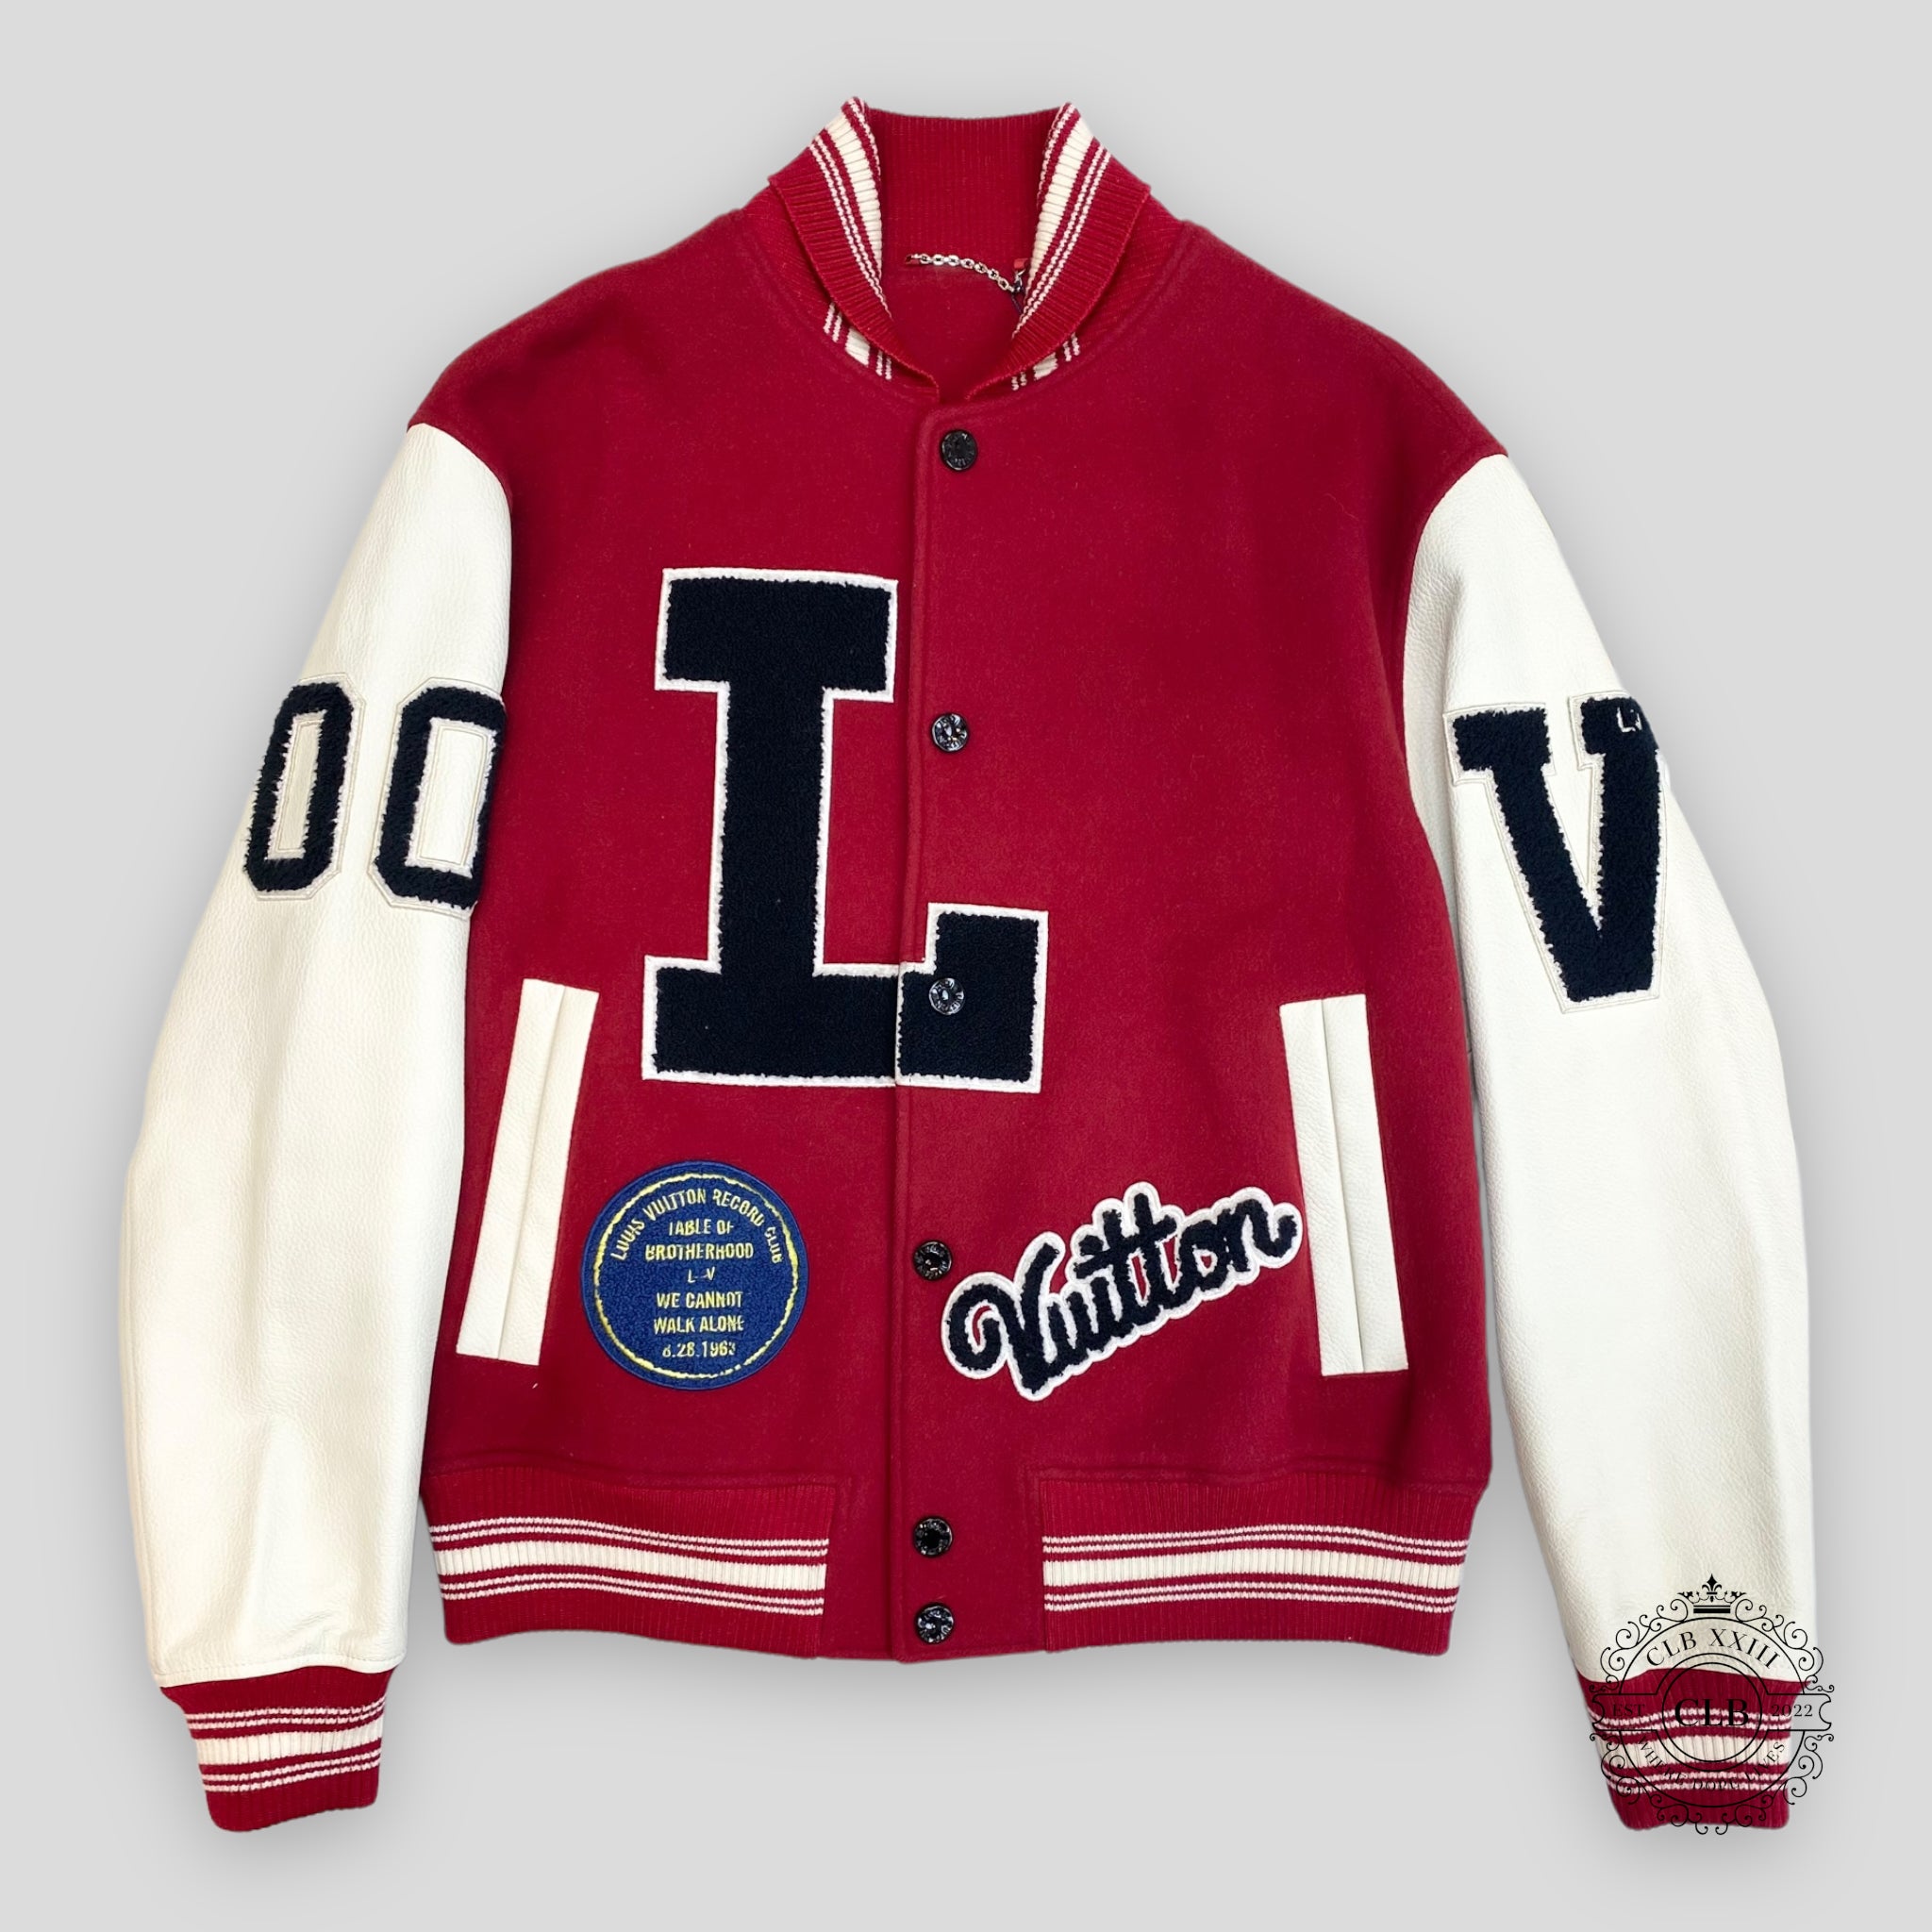 Louis Vuitton 2019 Dreaming Varsity Jacket - Red Outerwear